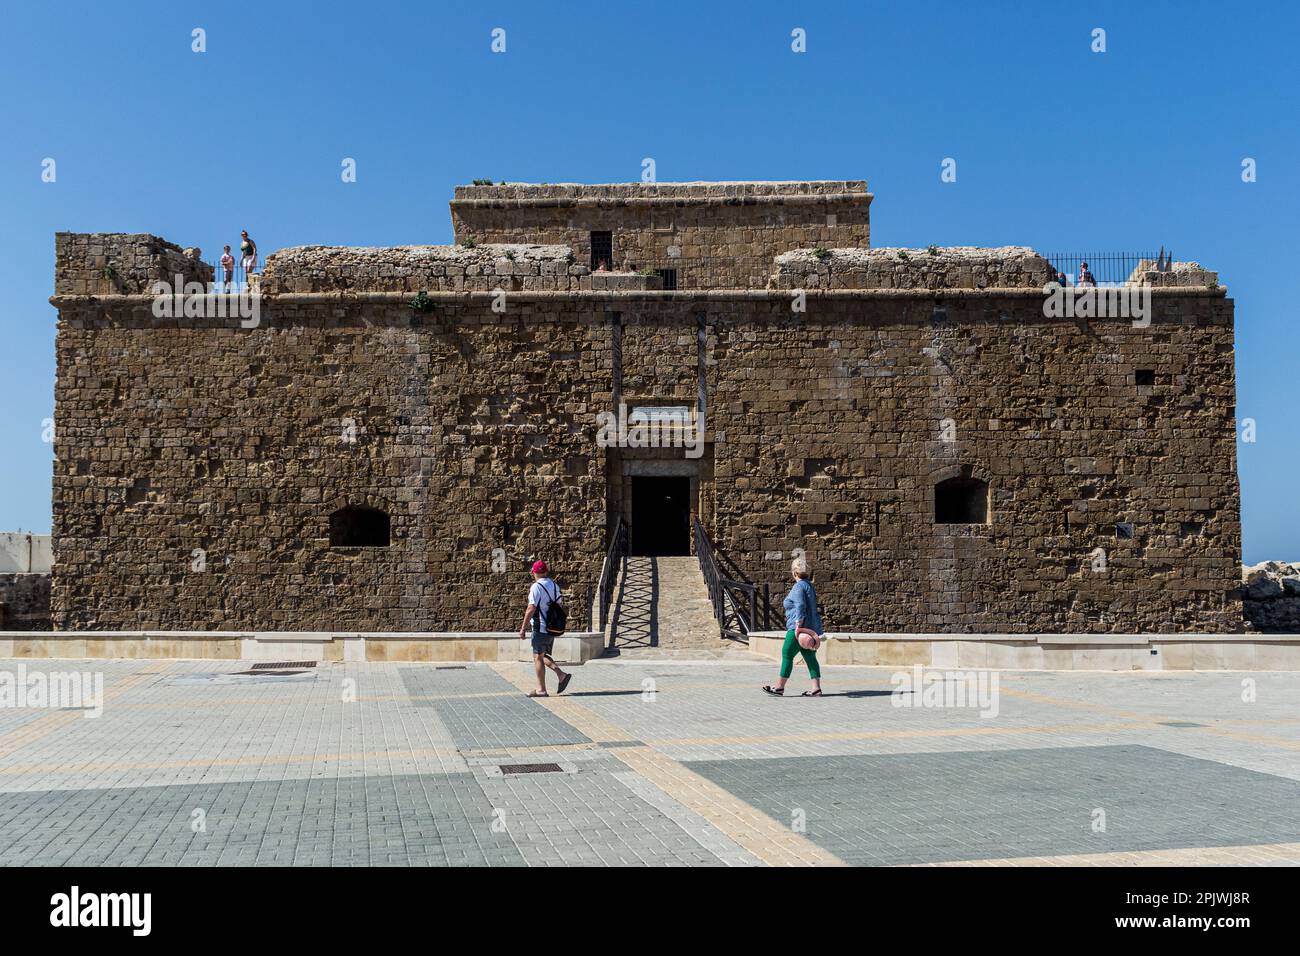 April 4, 2023, Paphos, Paphos, Cyprus: Tourists are seen in front of the castle at the port of Paphos. Cyprus sees massive increase in tourist arrivals in February with UK topping the list. Tourist arrivals in Cyprus increased by 65.6% year-on-year in February 2023. This fact, combined with the facts that Cyprus welcomed 3.2 million tourists last year, despite the absence of 800,000 Russian and Ukrainian tourists because of the war and that for 2022 it is estimated that tourists' spending has increased by about 13% on average for each trip, makes 2023 seem very promising. (Credit Image: © Kost Stock Photo